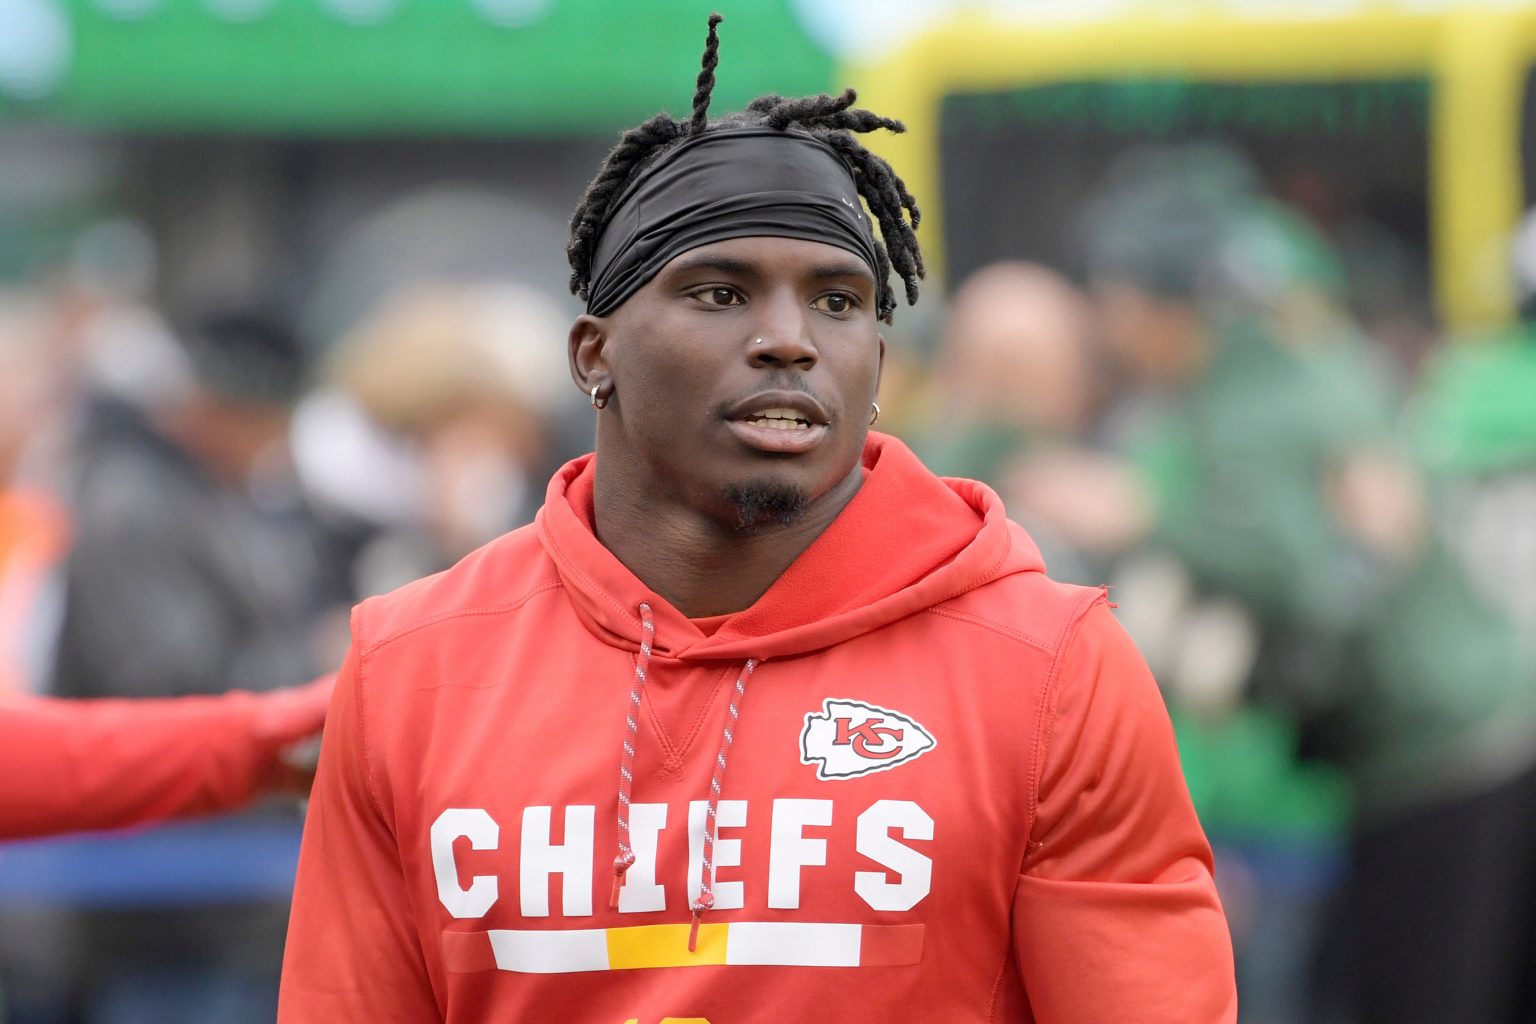 Tyreek Hill Ethnicity, Race and Nationality